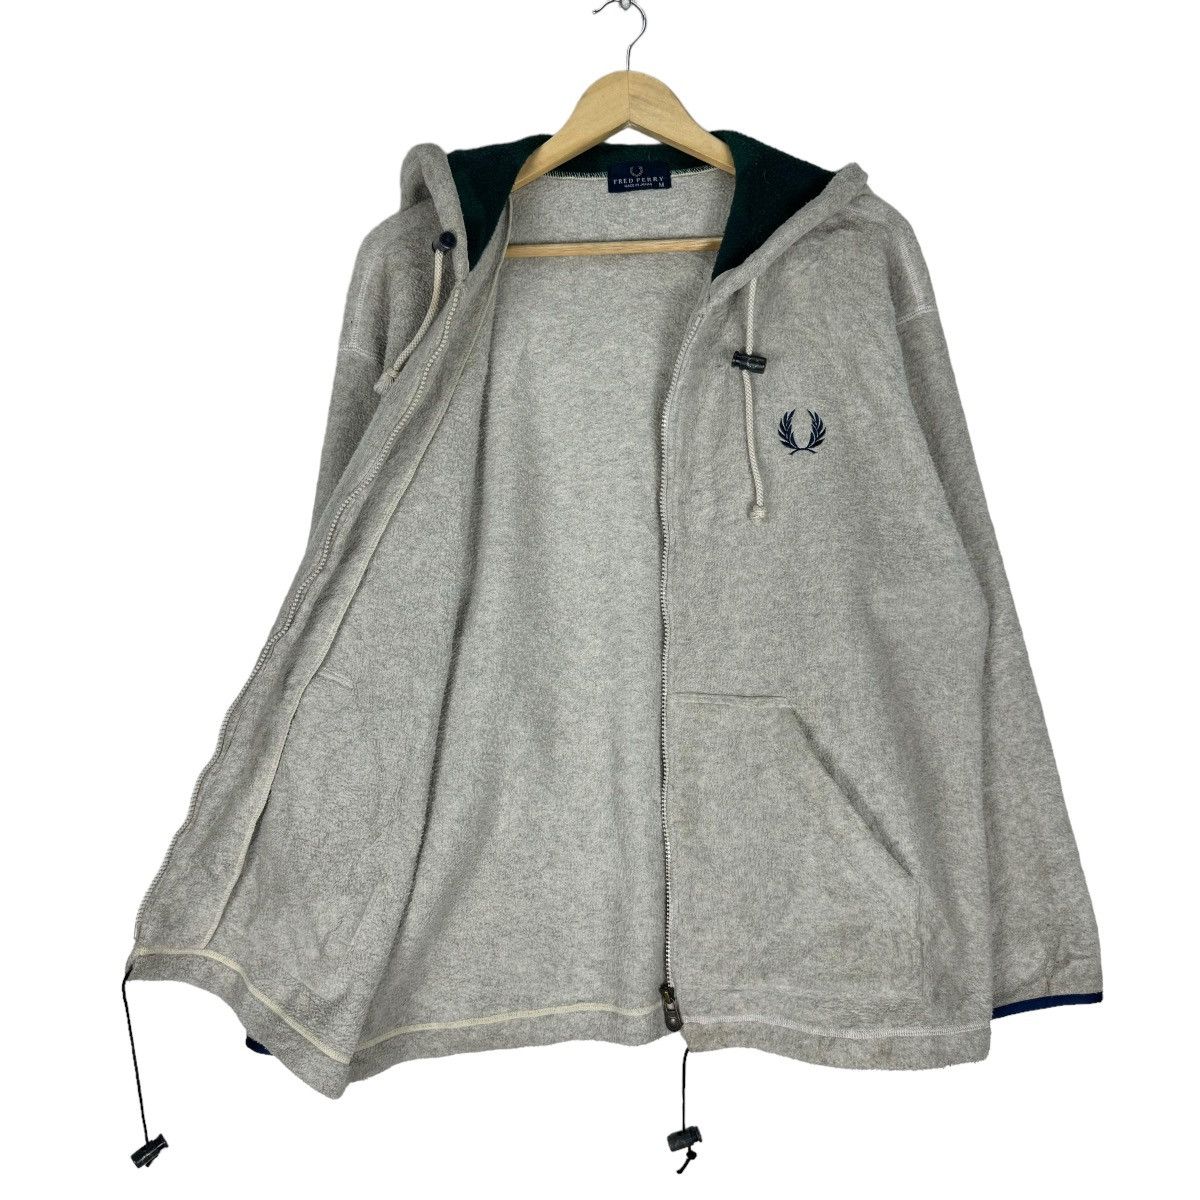 ❄️FRED PERRY HOODIE FLEECE SWEATER - 7